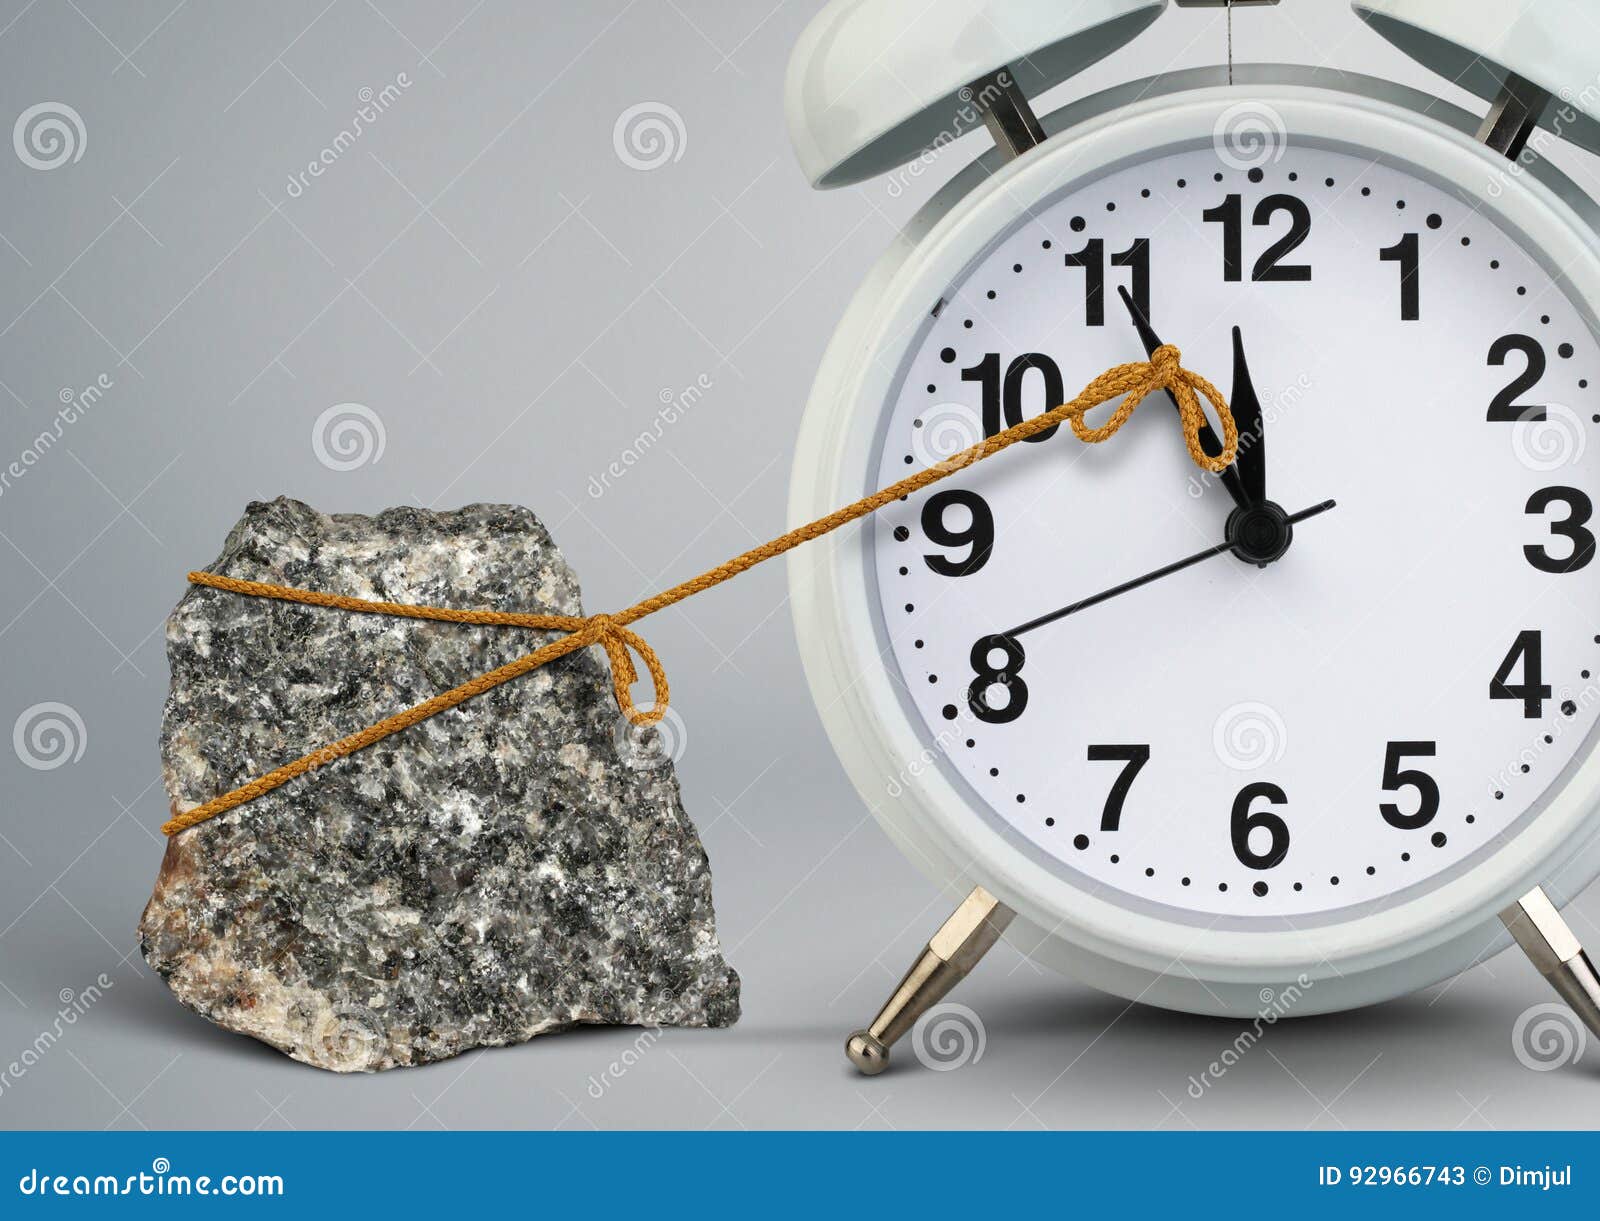 time on alarm clock stop by stone, delay concept